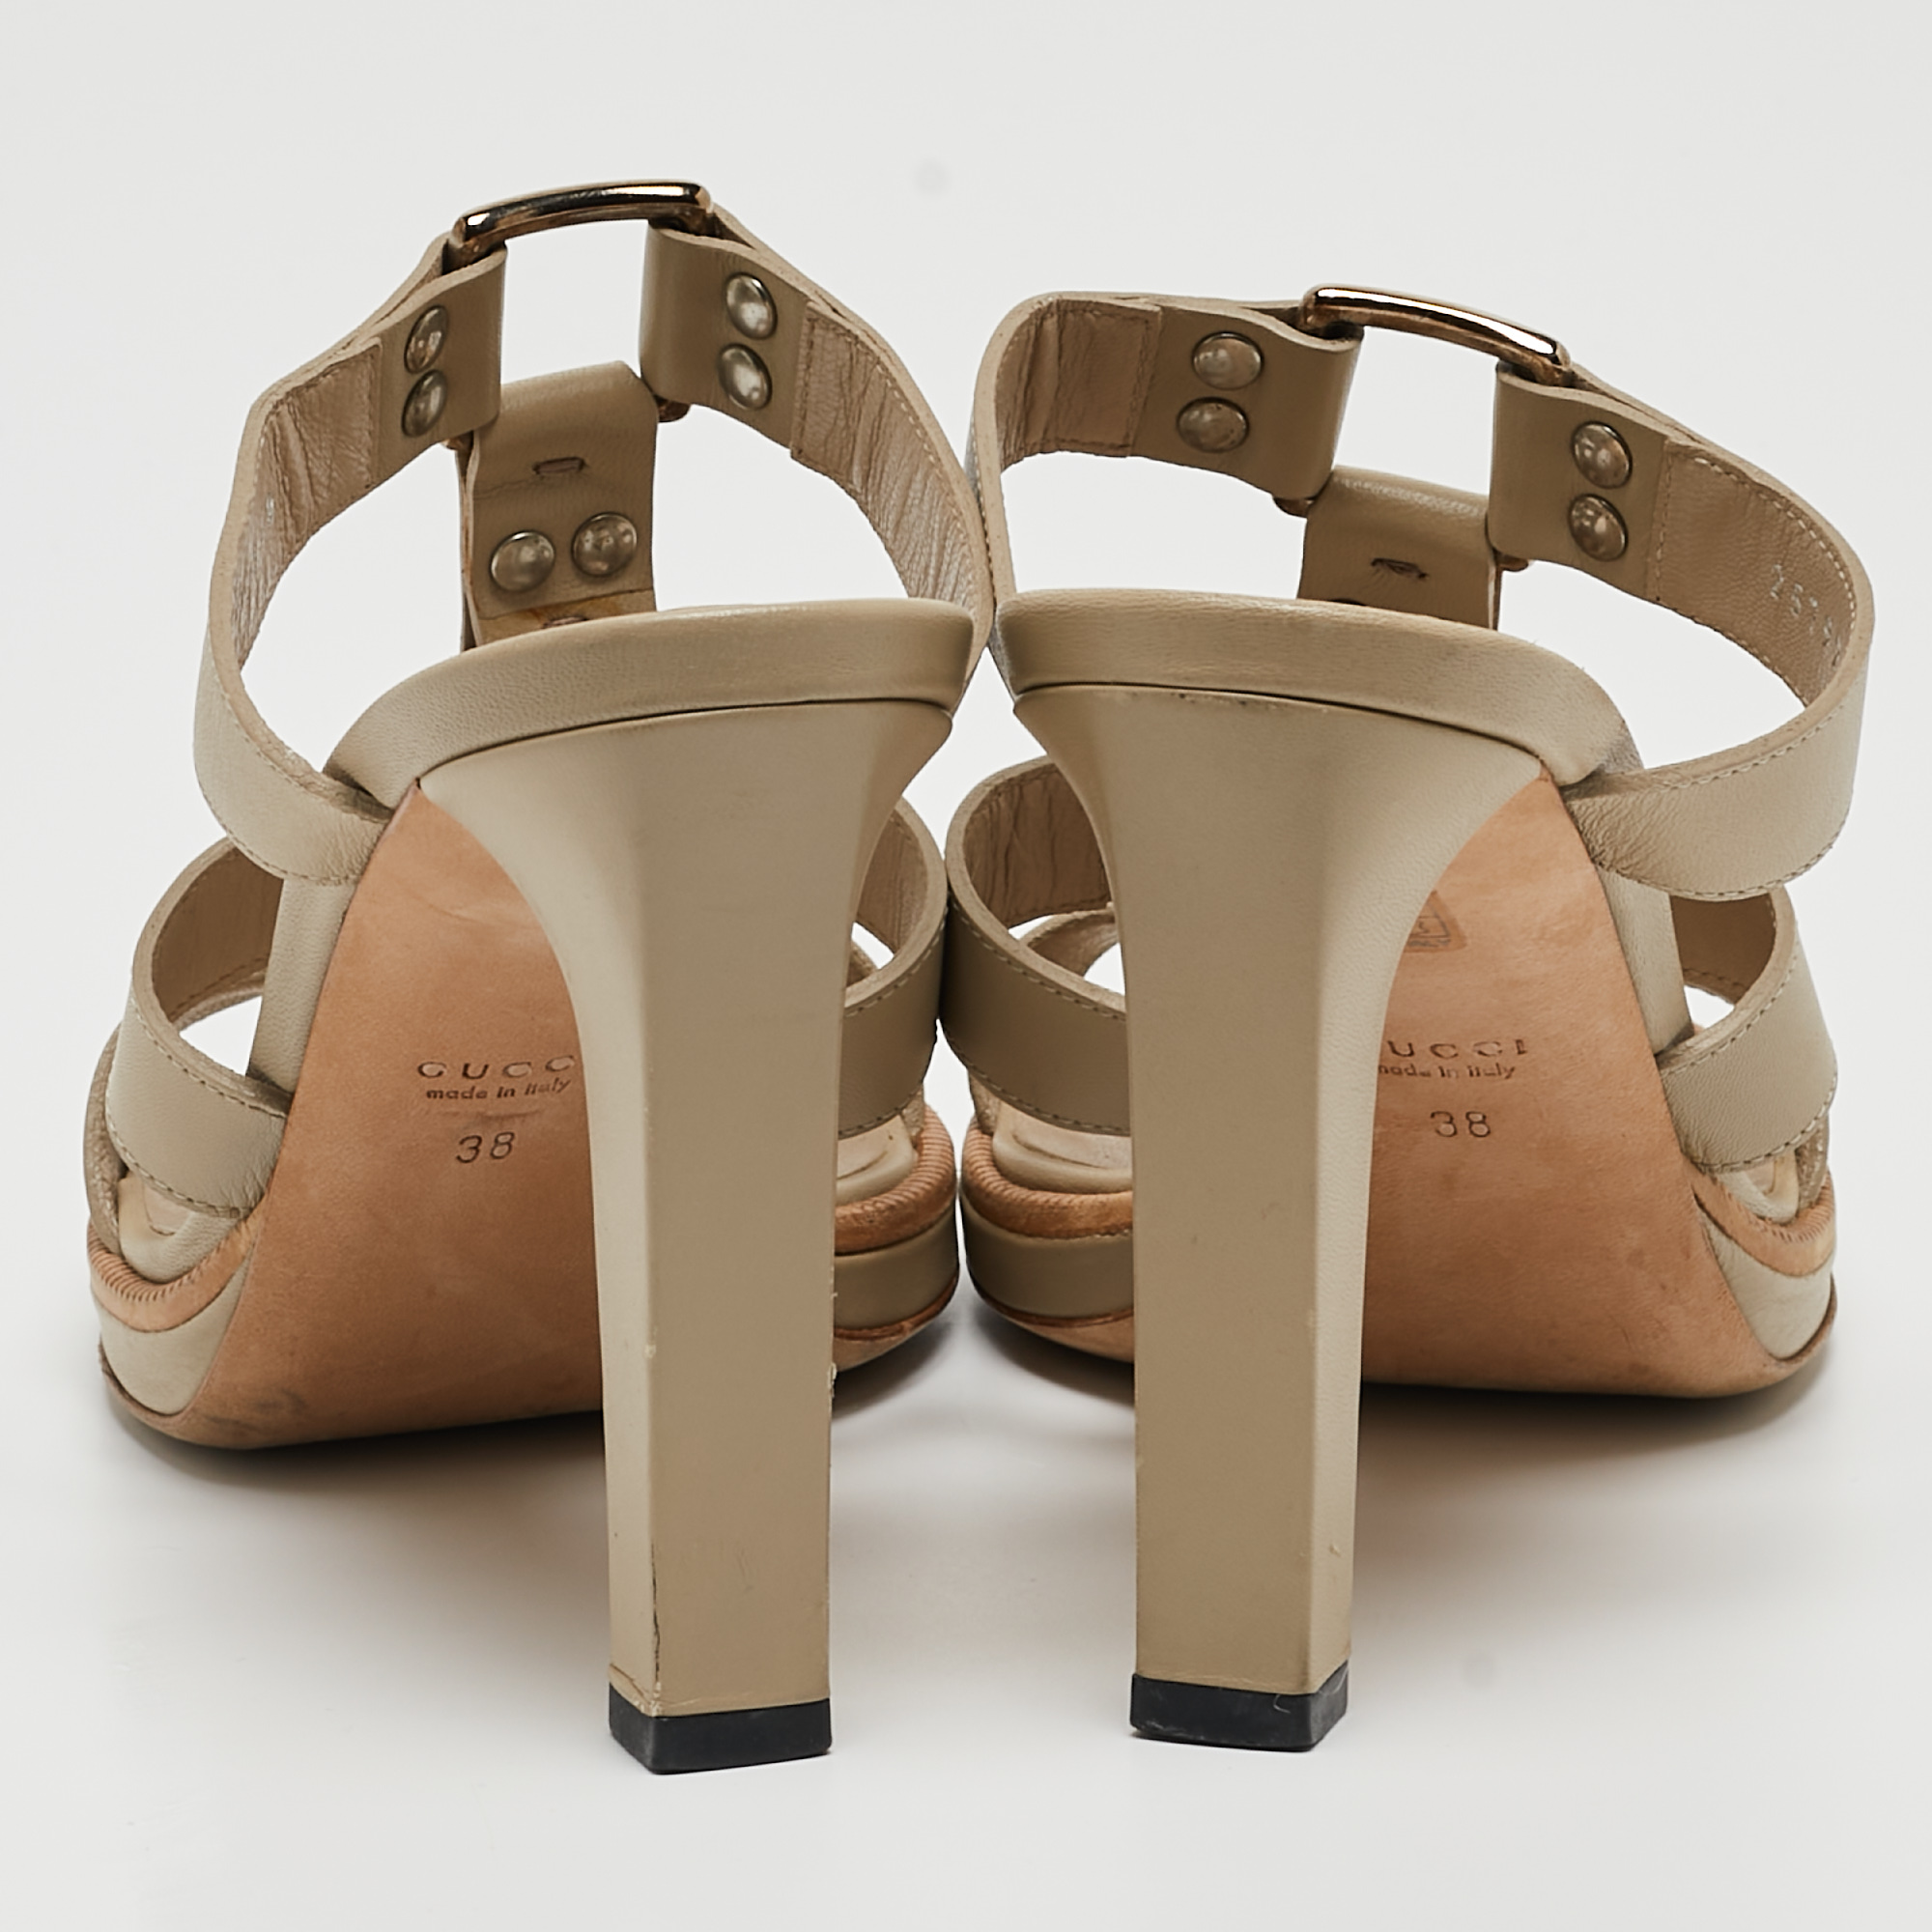 Gucci Beige Leather Strappy Slide Sandals Size 38